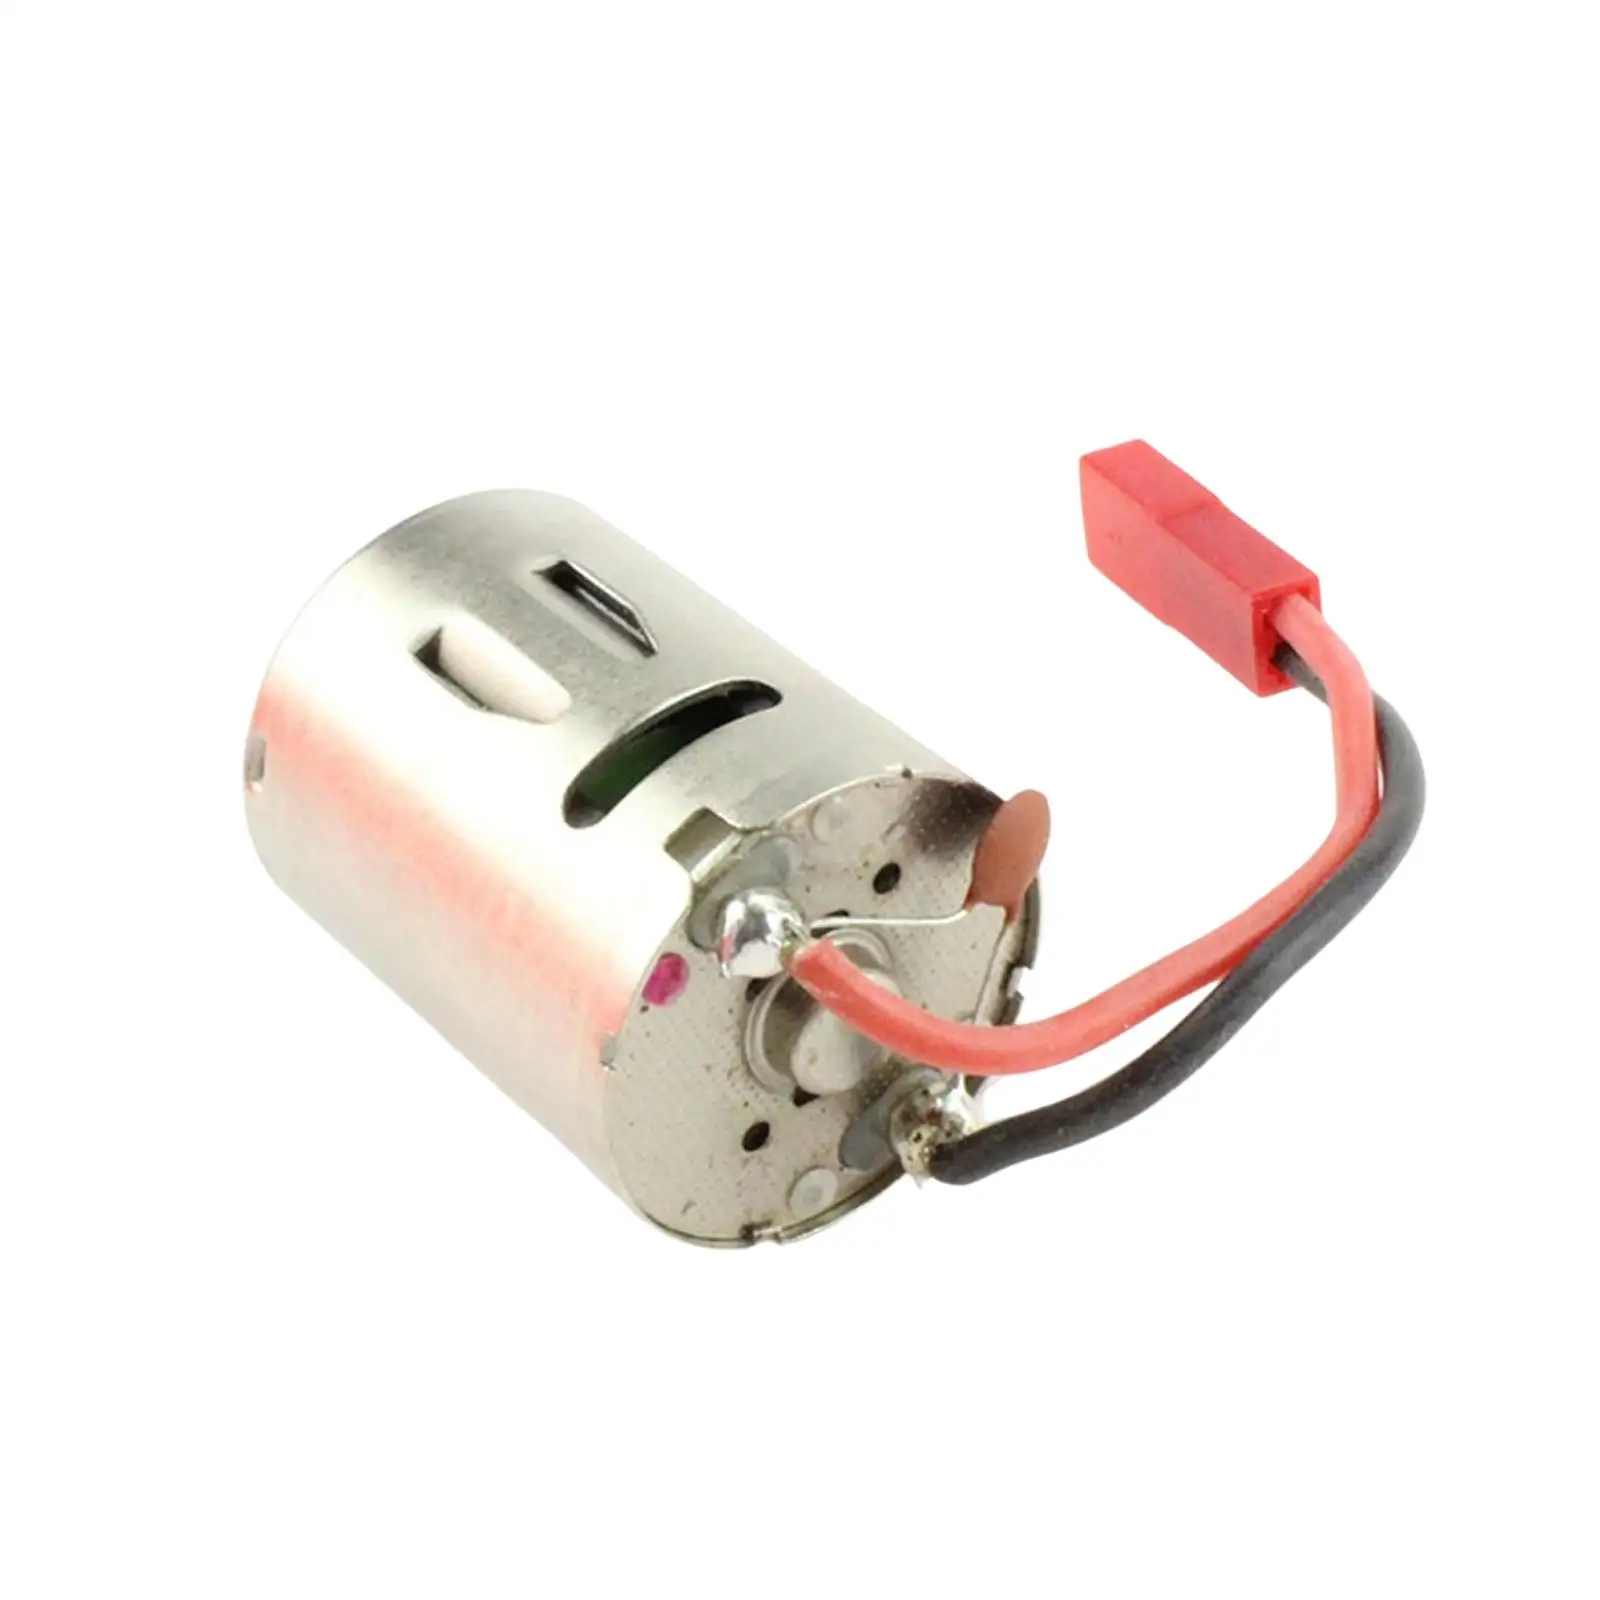 Metal RC Electric Boat Motor Upgrade for WL917-24 Speedboat RC Ship DIY Accs Parts